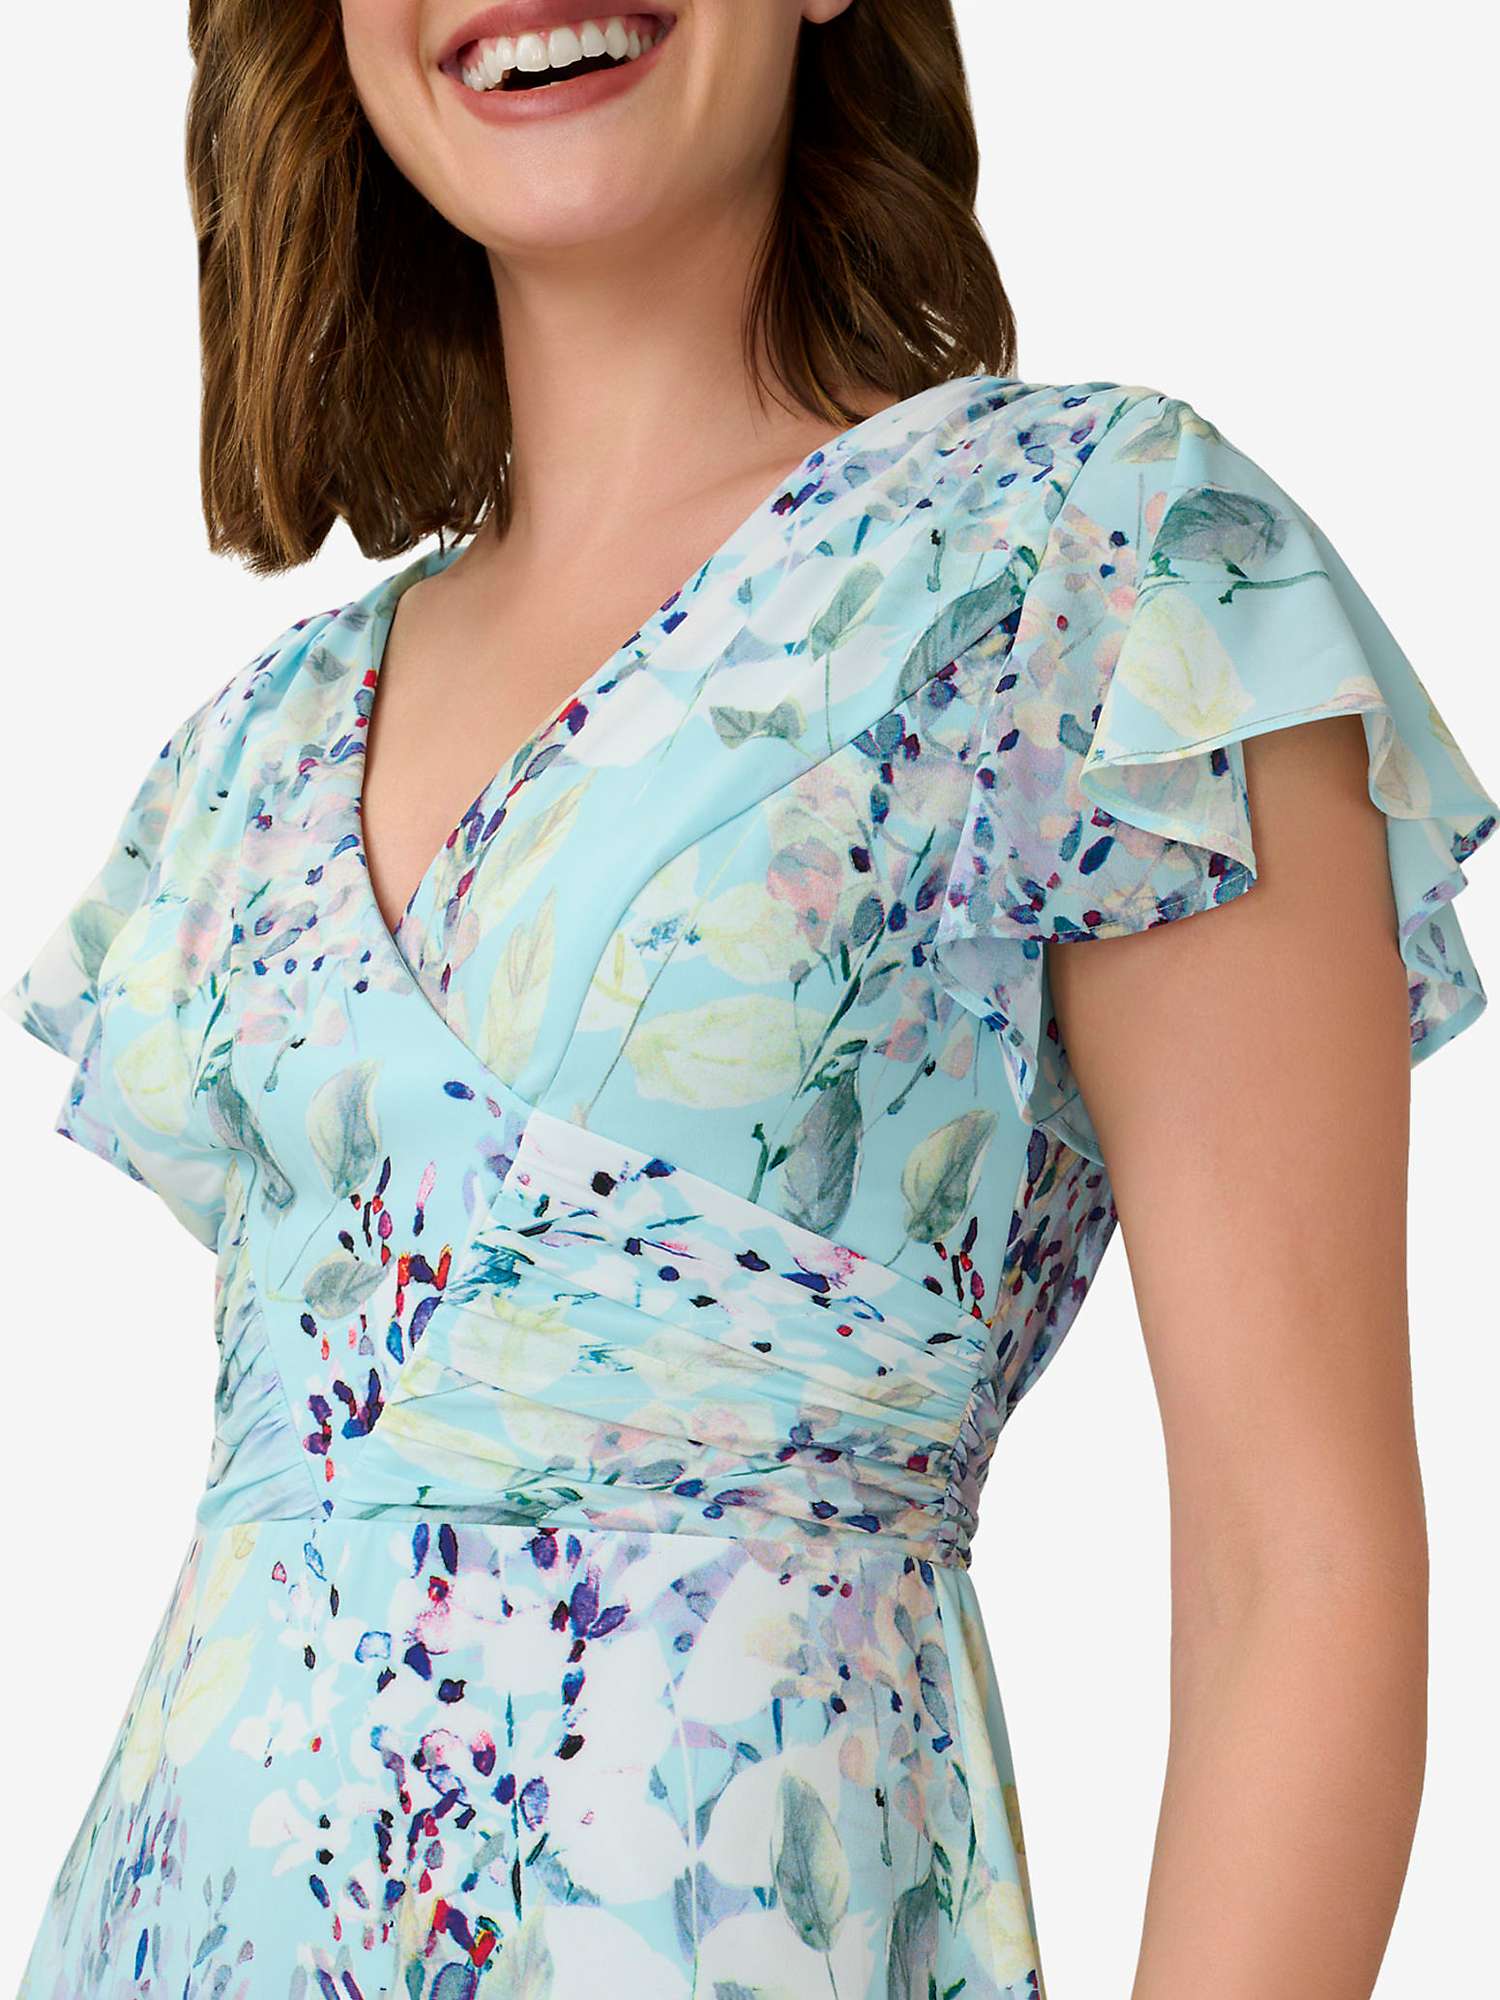 Buy Adrianna Papell Floral Printed Midi Dress, Light Blue Multi Online at johnlewis.com